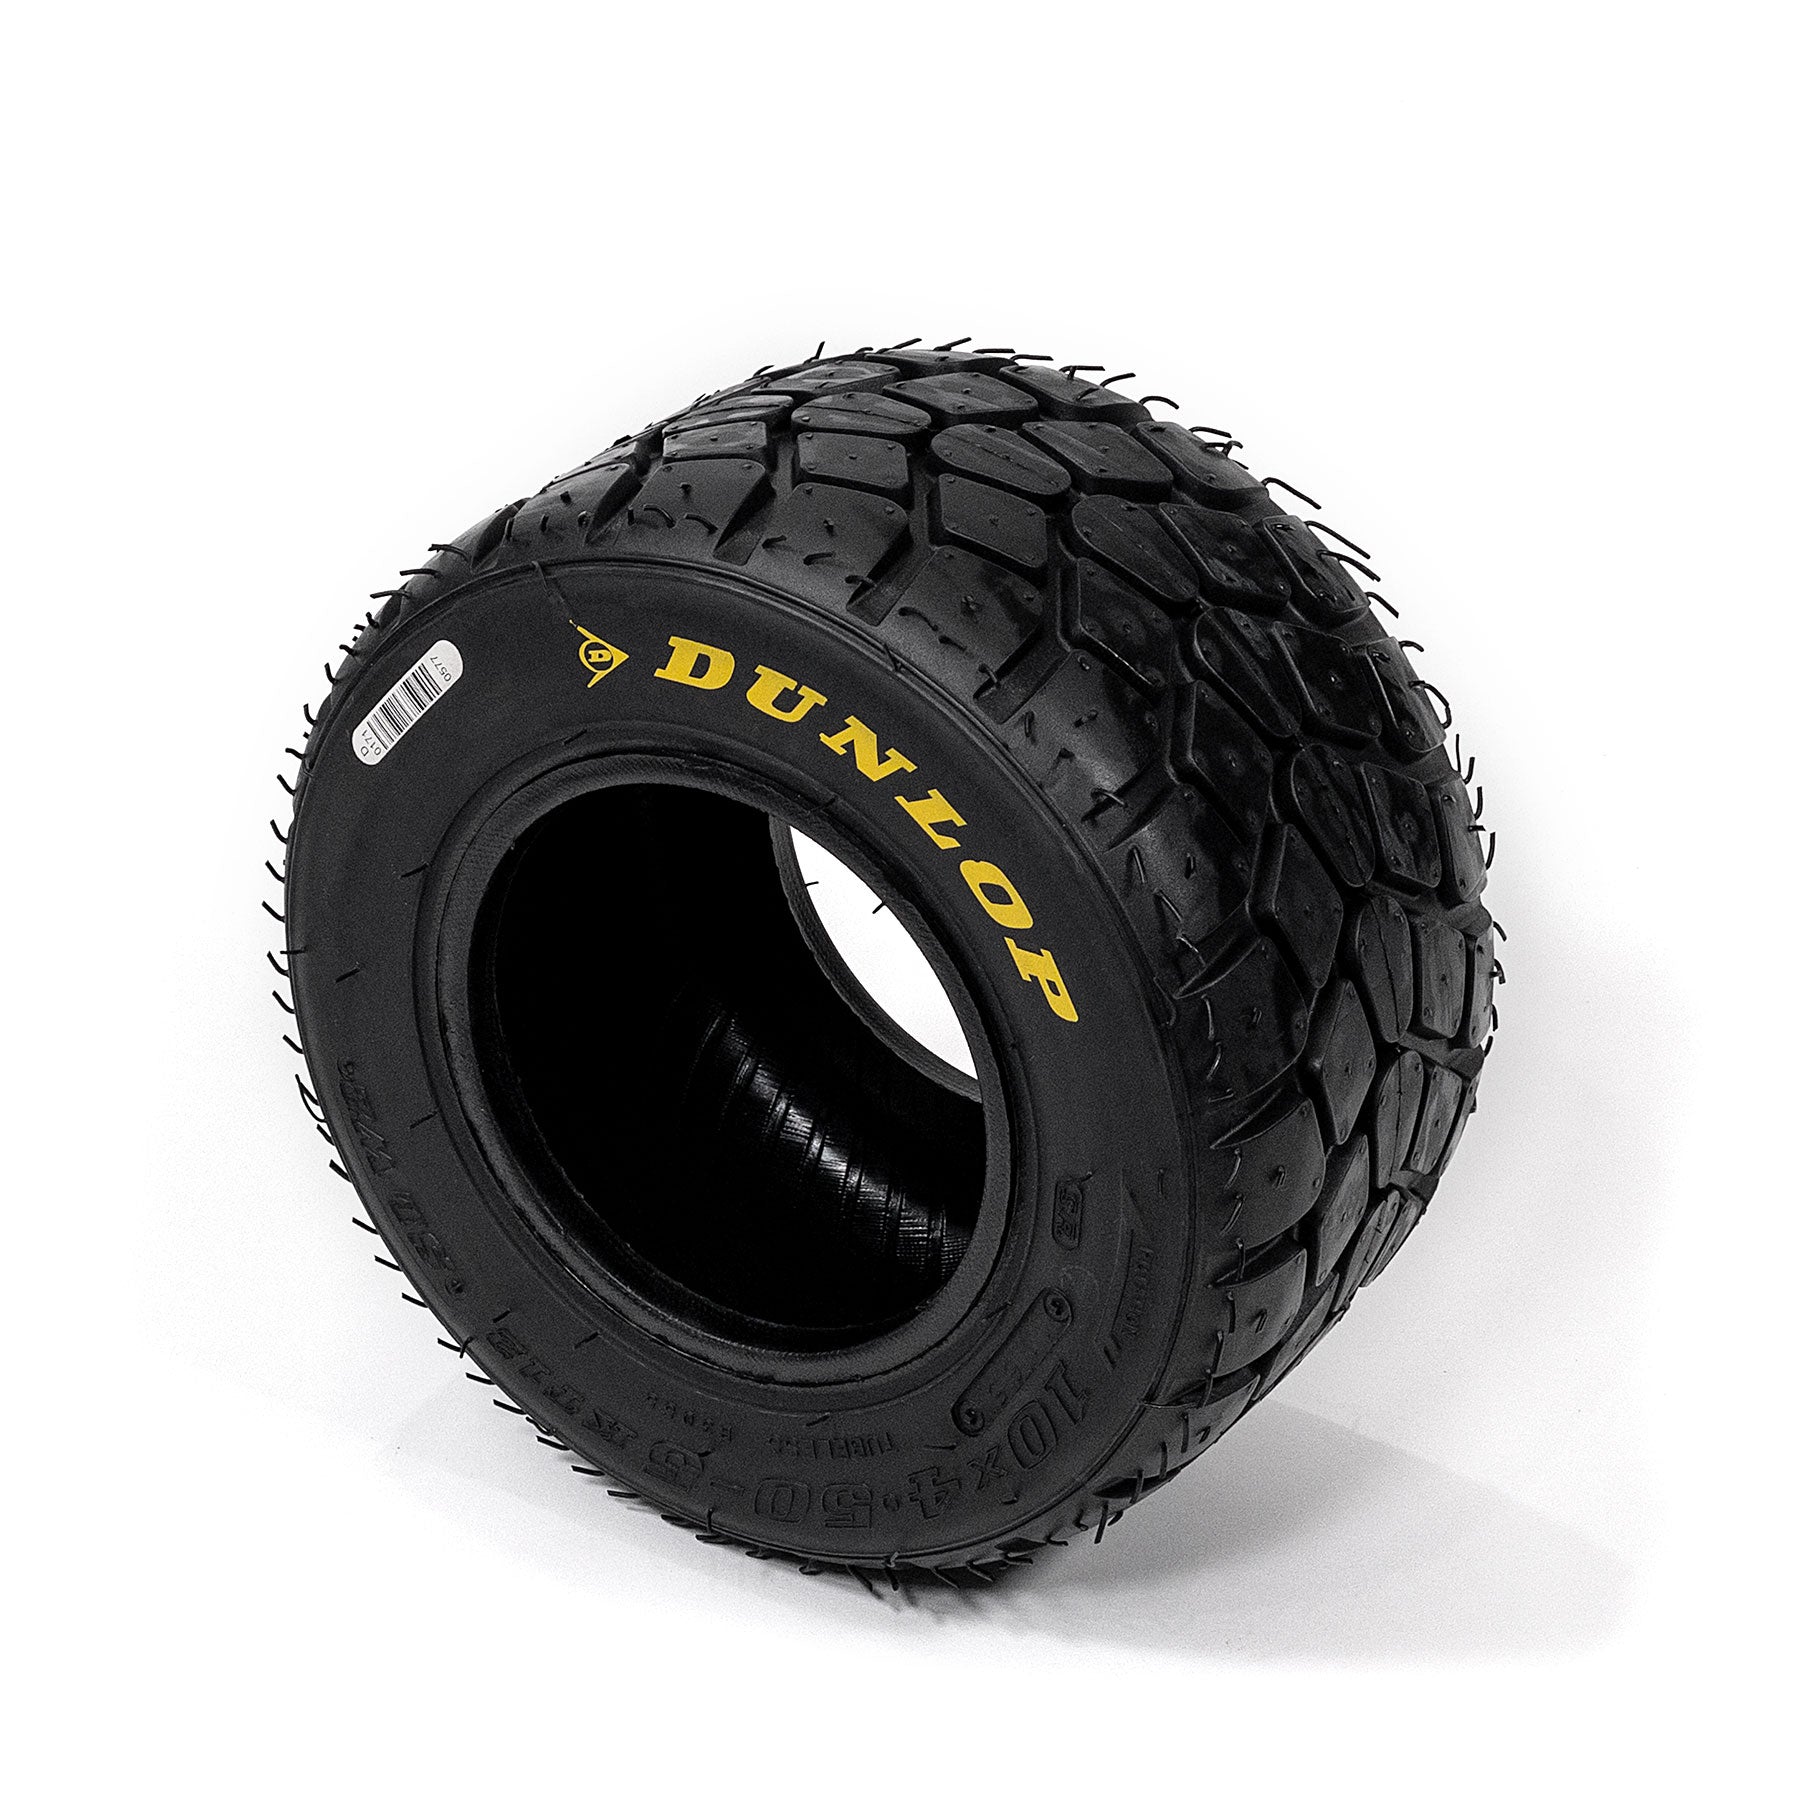 Dunlop Wet Front Tyre for use in KNSW racing